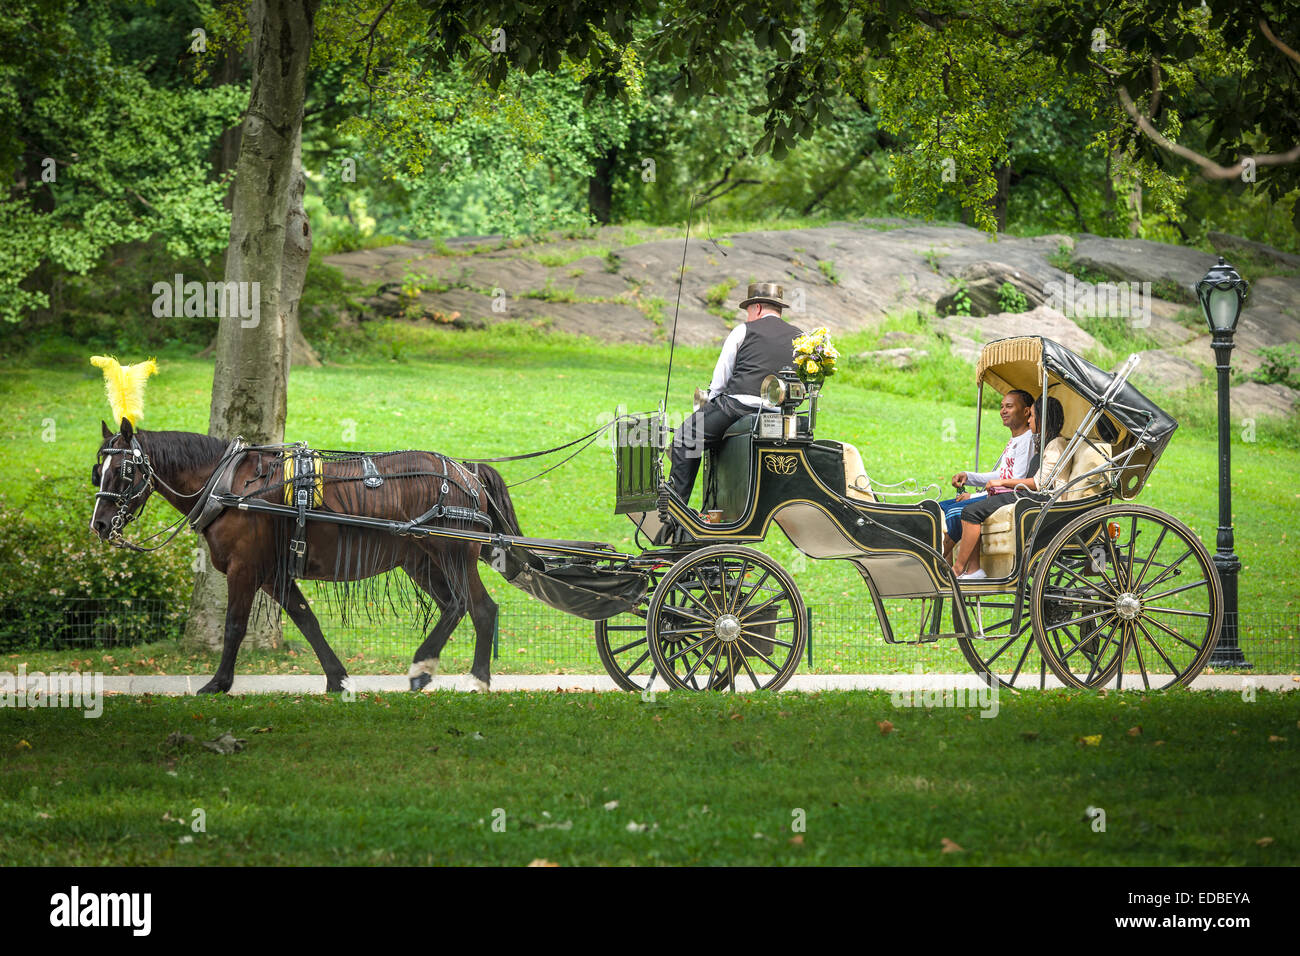 One of the many Horse & Carriages working in Central Park, New York. Stock Photo